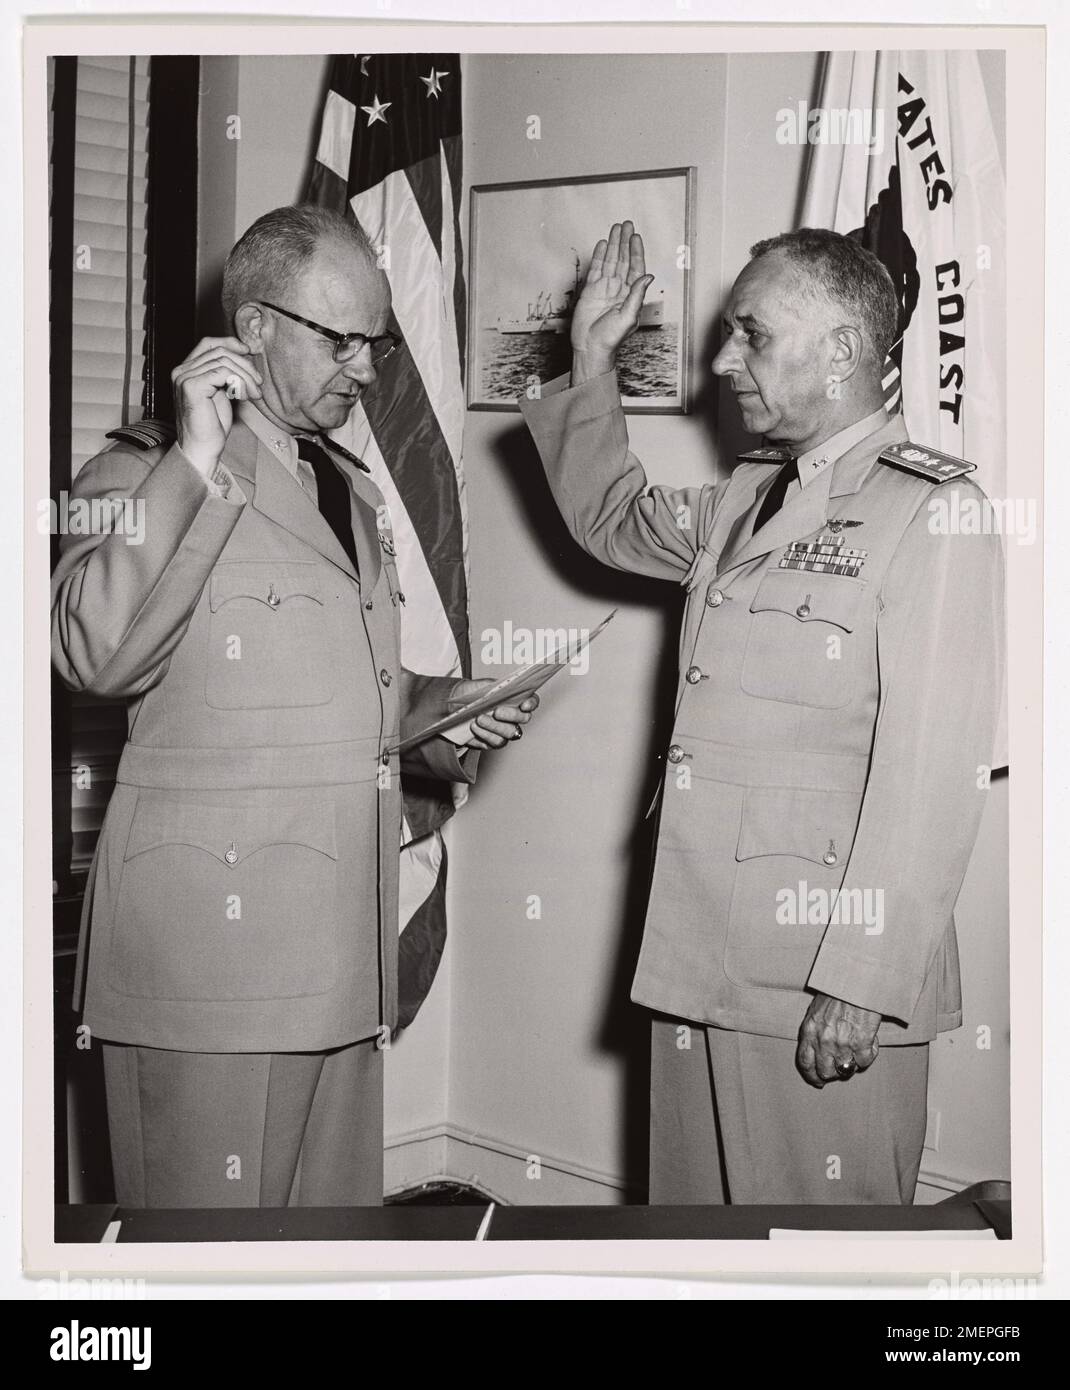 Captain Frank A. Leamy, Commander of the Ninth Coast Guard District, being sworn in as Rear Admiral. Picture shows Captain Frank A. Leamy, Commander of the Ninth Coast Guard District (Great Lakes Area) being sworn in today as Rear Admiral by Captain Harold C. Moore, Chief of Staff of the Ninth Coast Guard District. Stock Photo